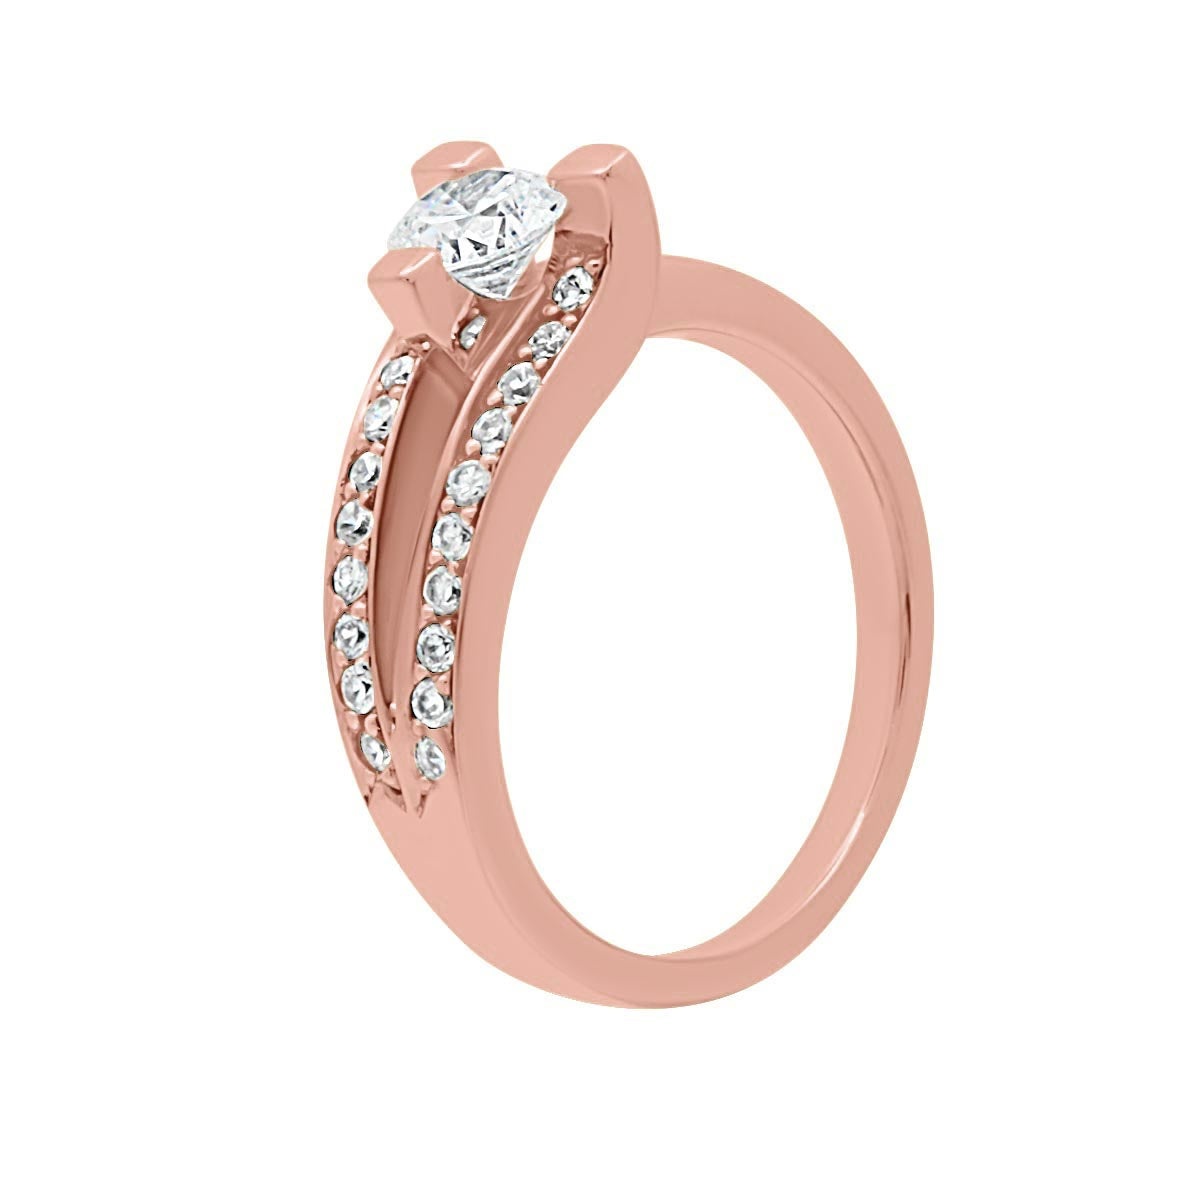 Unusual Diamond Engagement Ring Set in rose Gold in an upright angled position